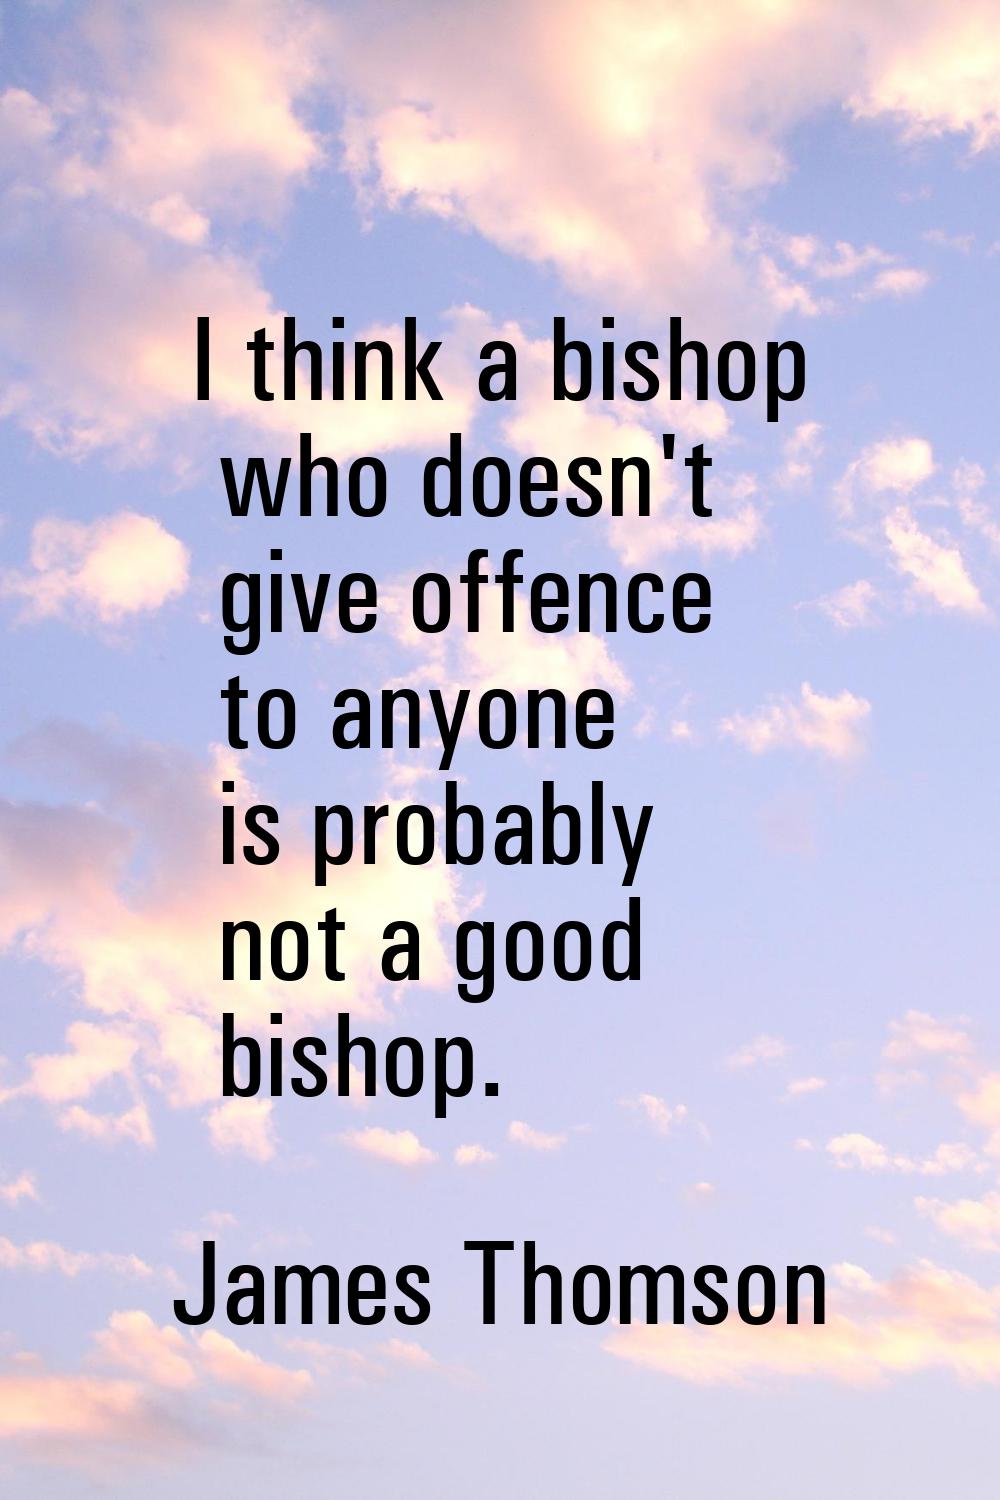 I think a bishop who doesn't give offence to anyone is probably not a good bishop.